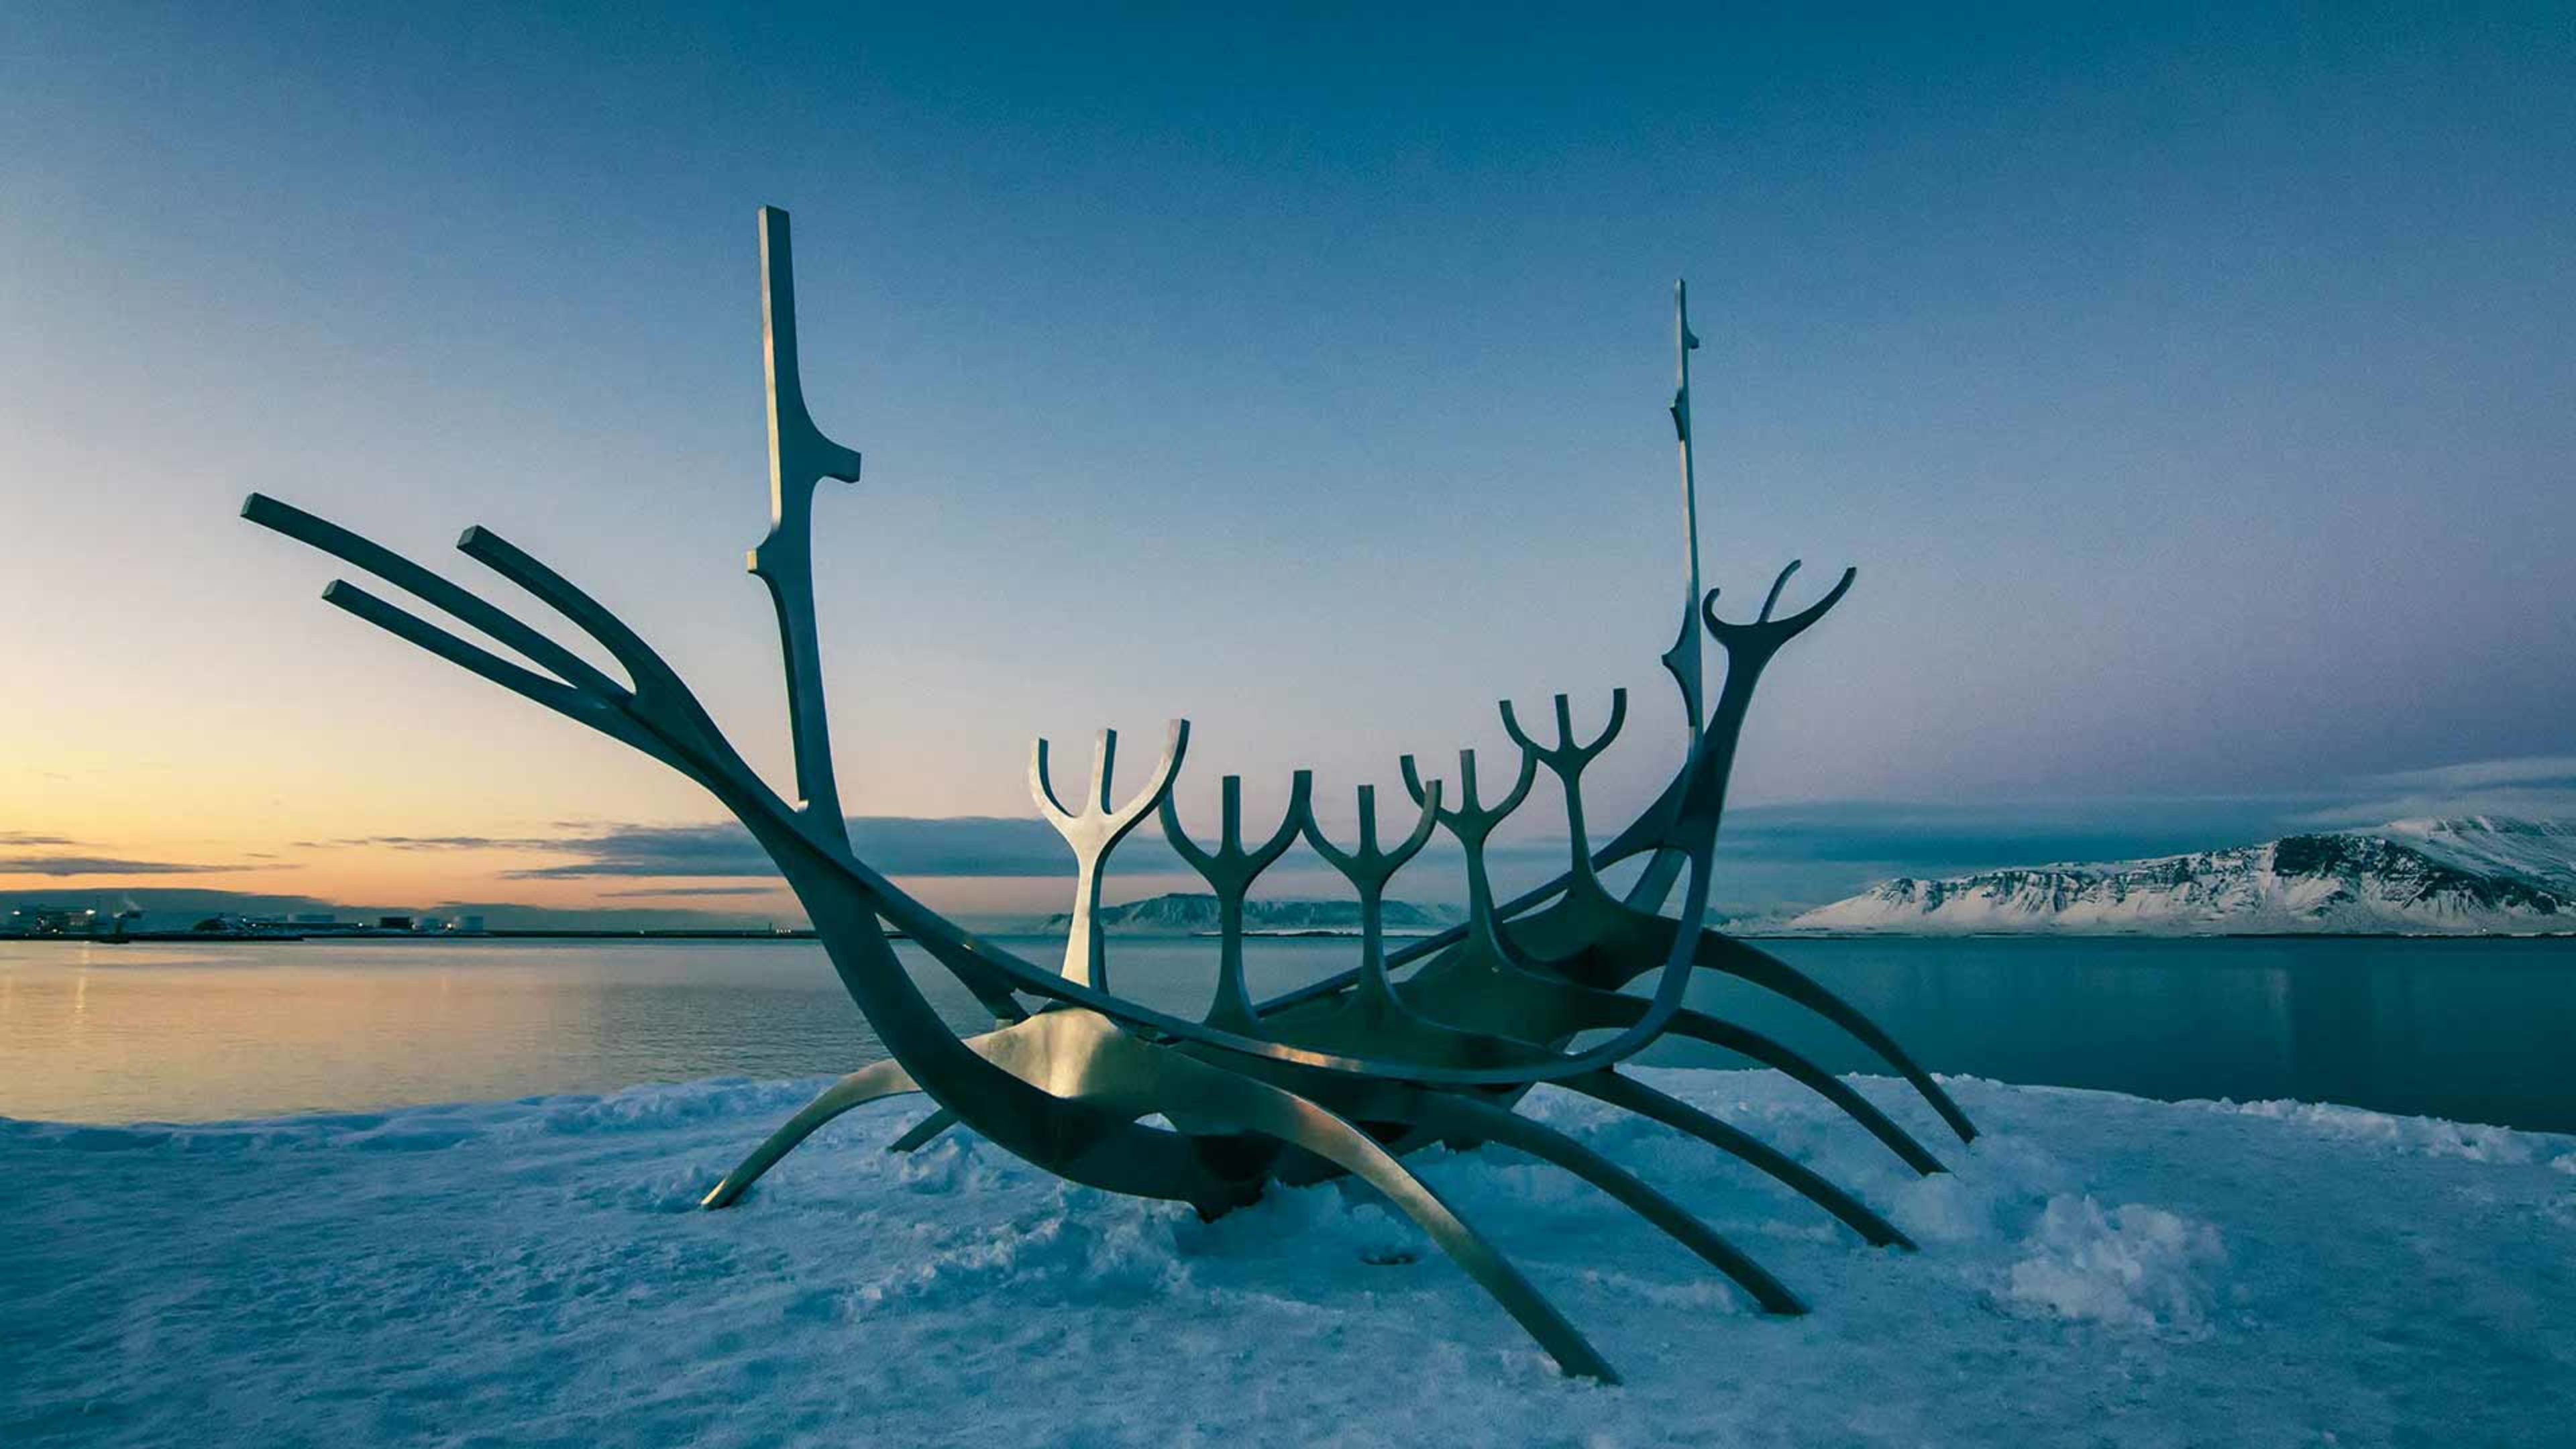 The Sun Voyager sculpture on a snowy winters evening in Iceland